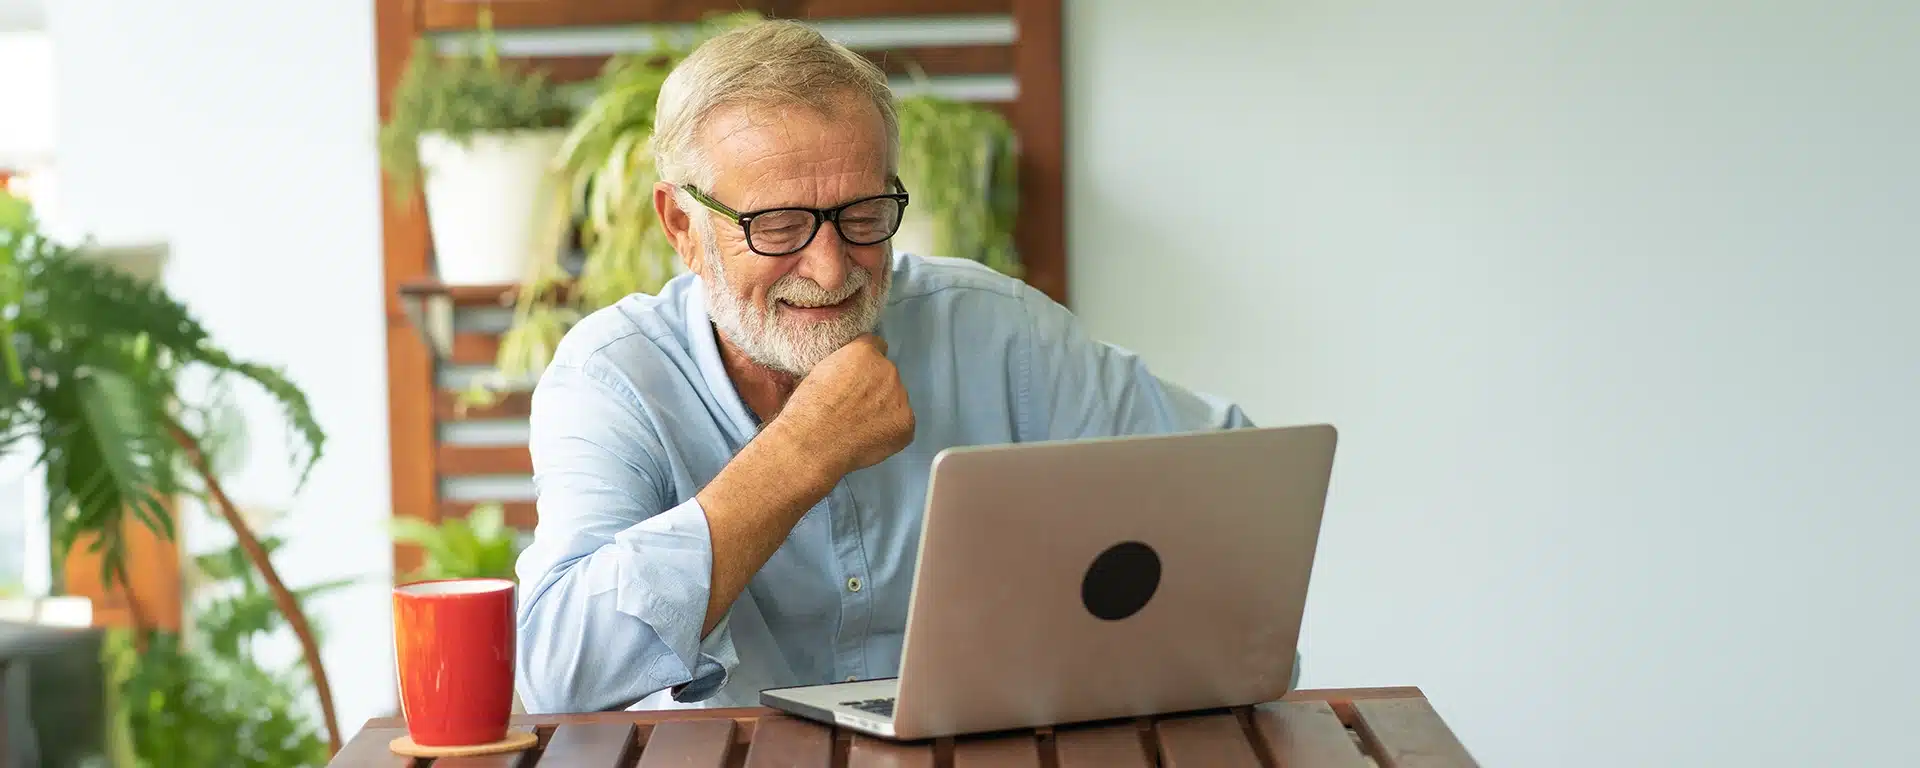 An older man smiling, having a coffee while using a laptop.